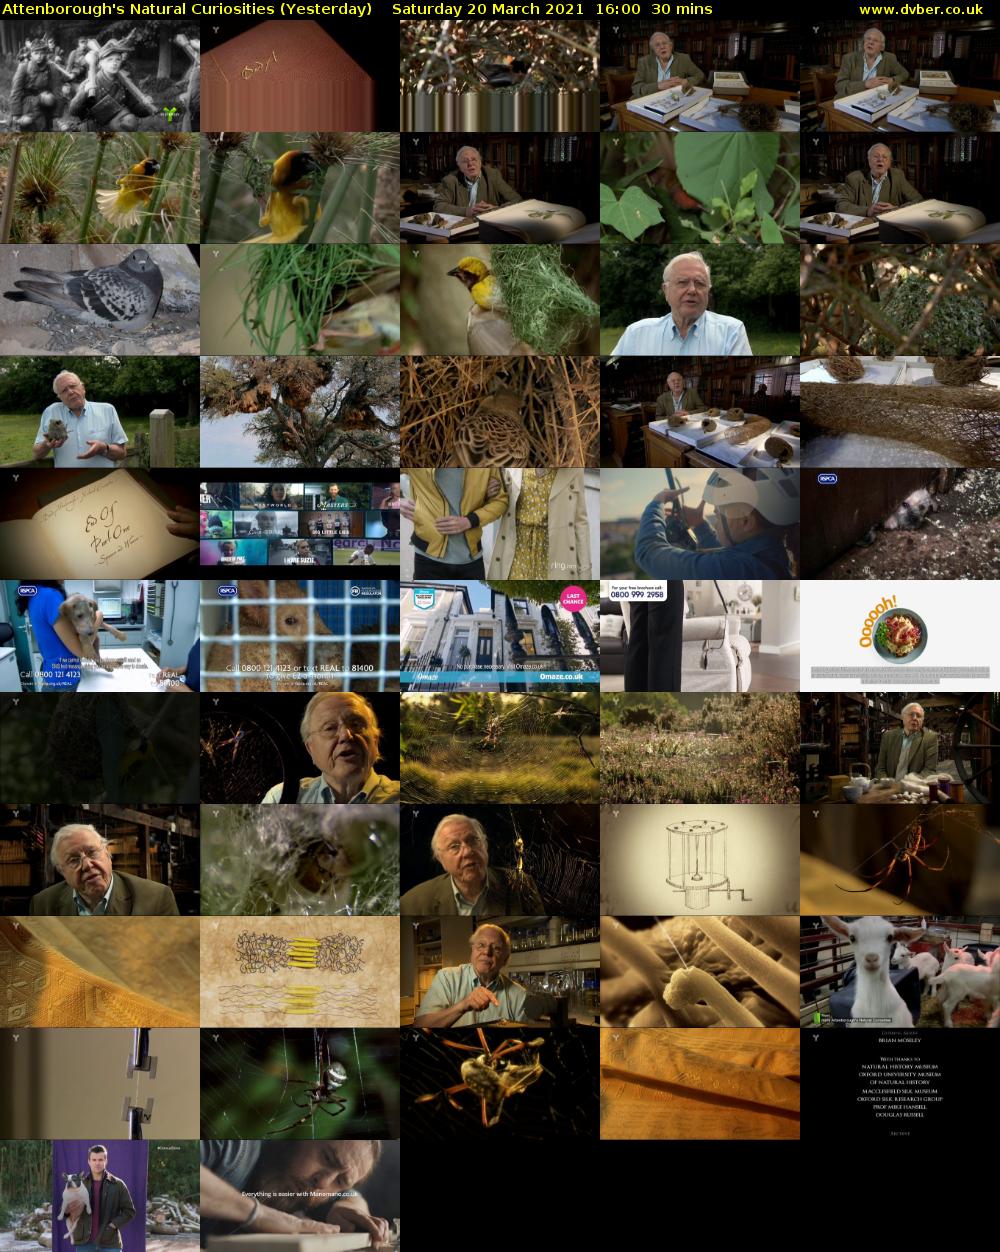 Attenborough's Natural Curiosities (Yesterday) Saturday 20 March 2021 16:00 - 16:30